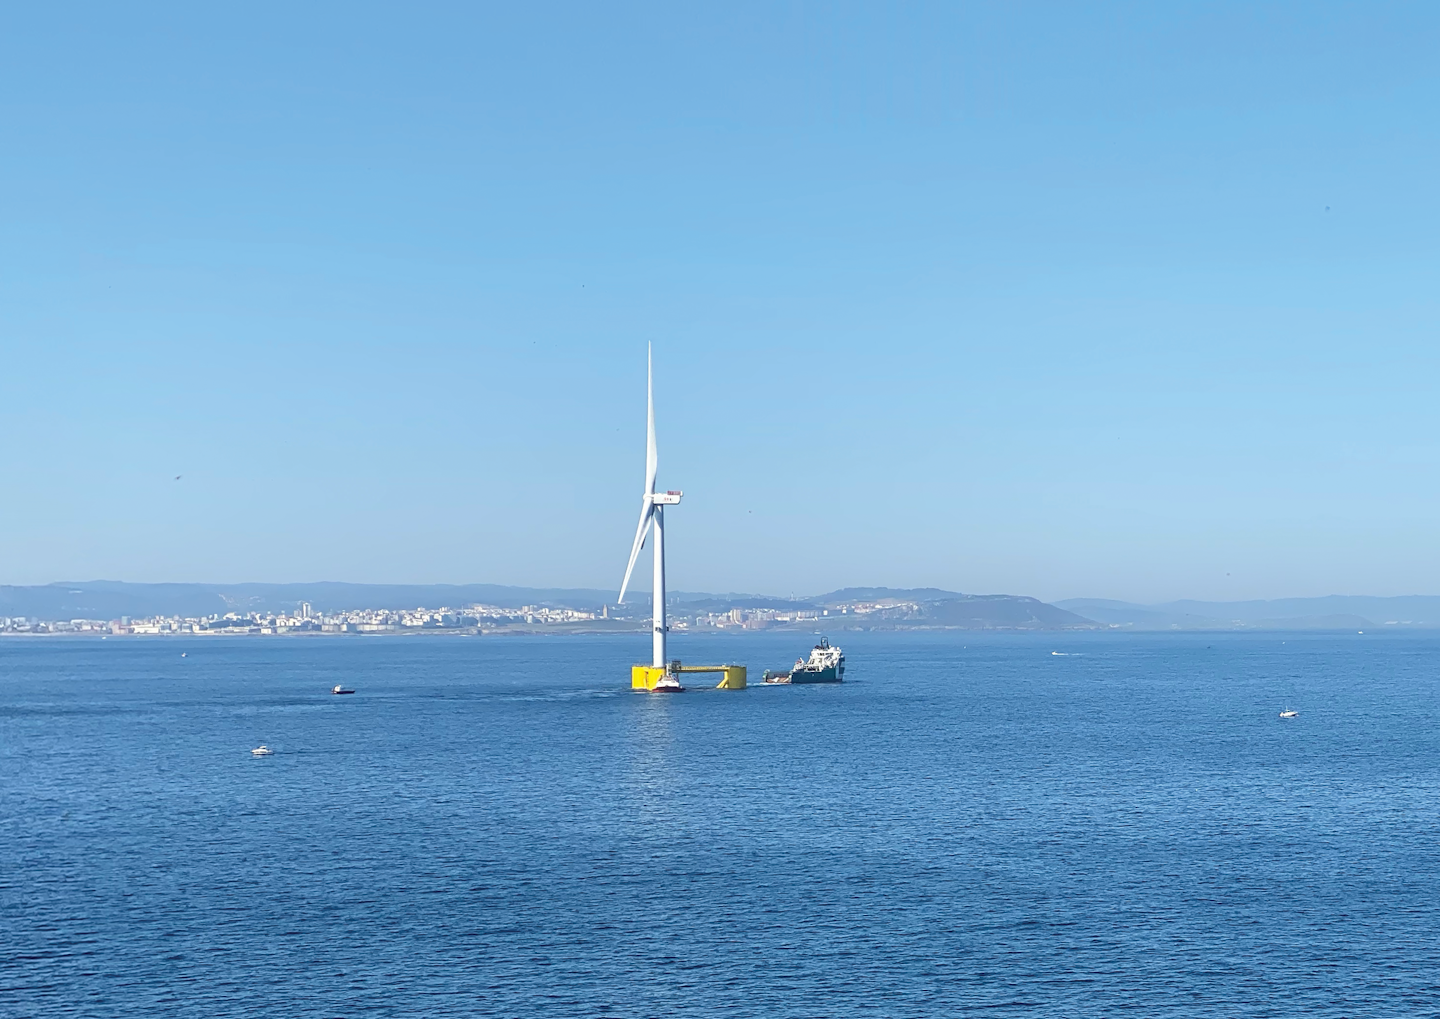 The last platform of the world’s first semi-submersible floating wind farm sets sail from Ferrol’s Port.